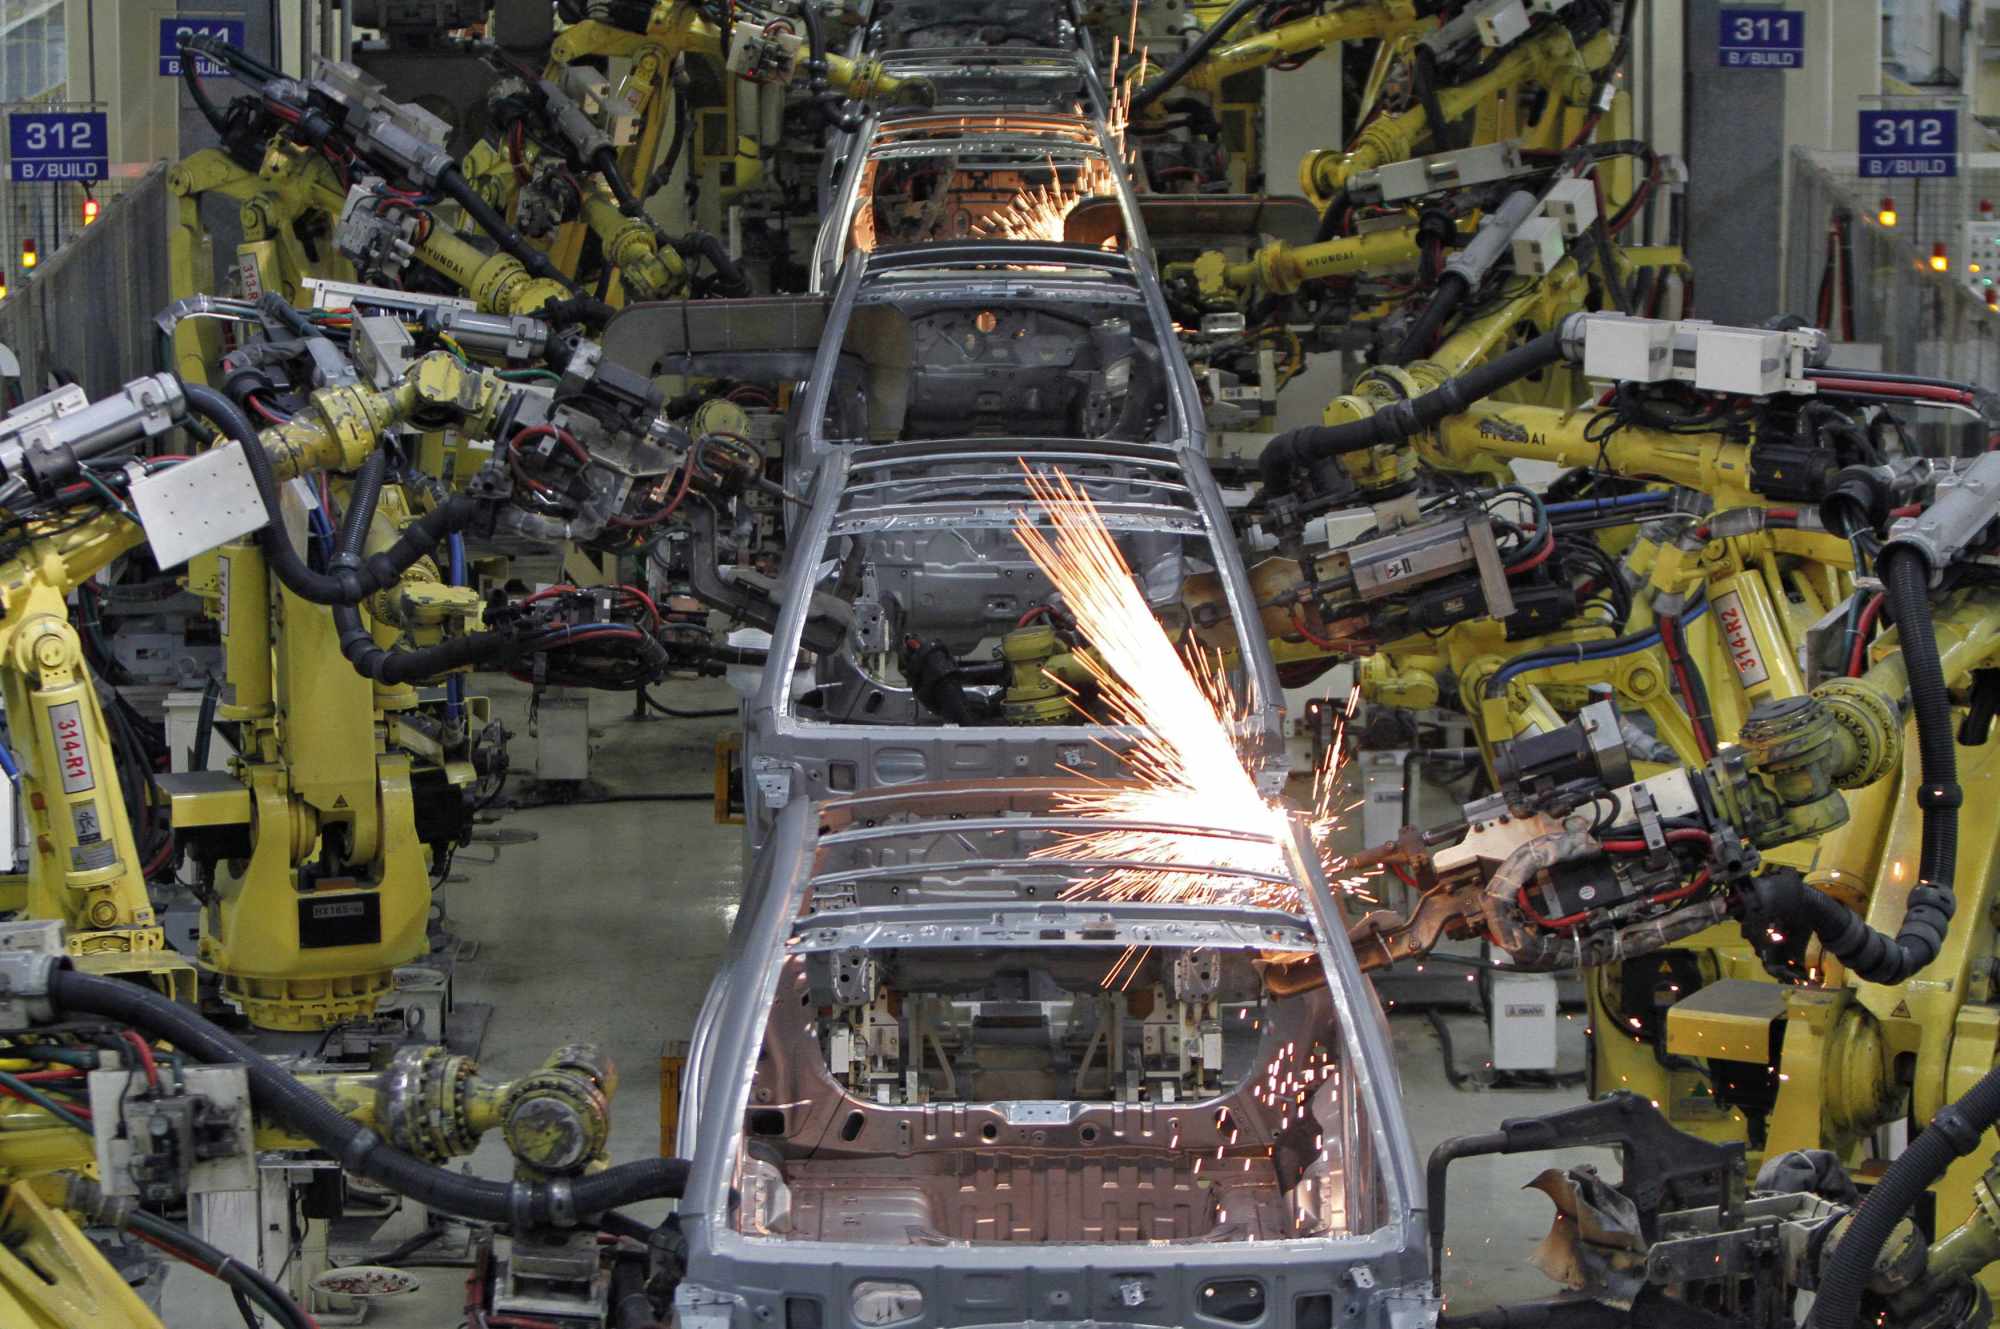 Robot arms assemble cars at a Hyundai Motor India Ltd. plant in Tamil Nadu. The southern Indian state has quickly expanded its global footprint by playing host to international businesses. Photo: Reuters